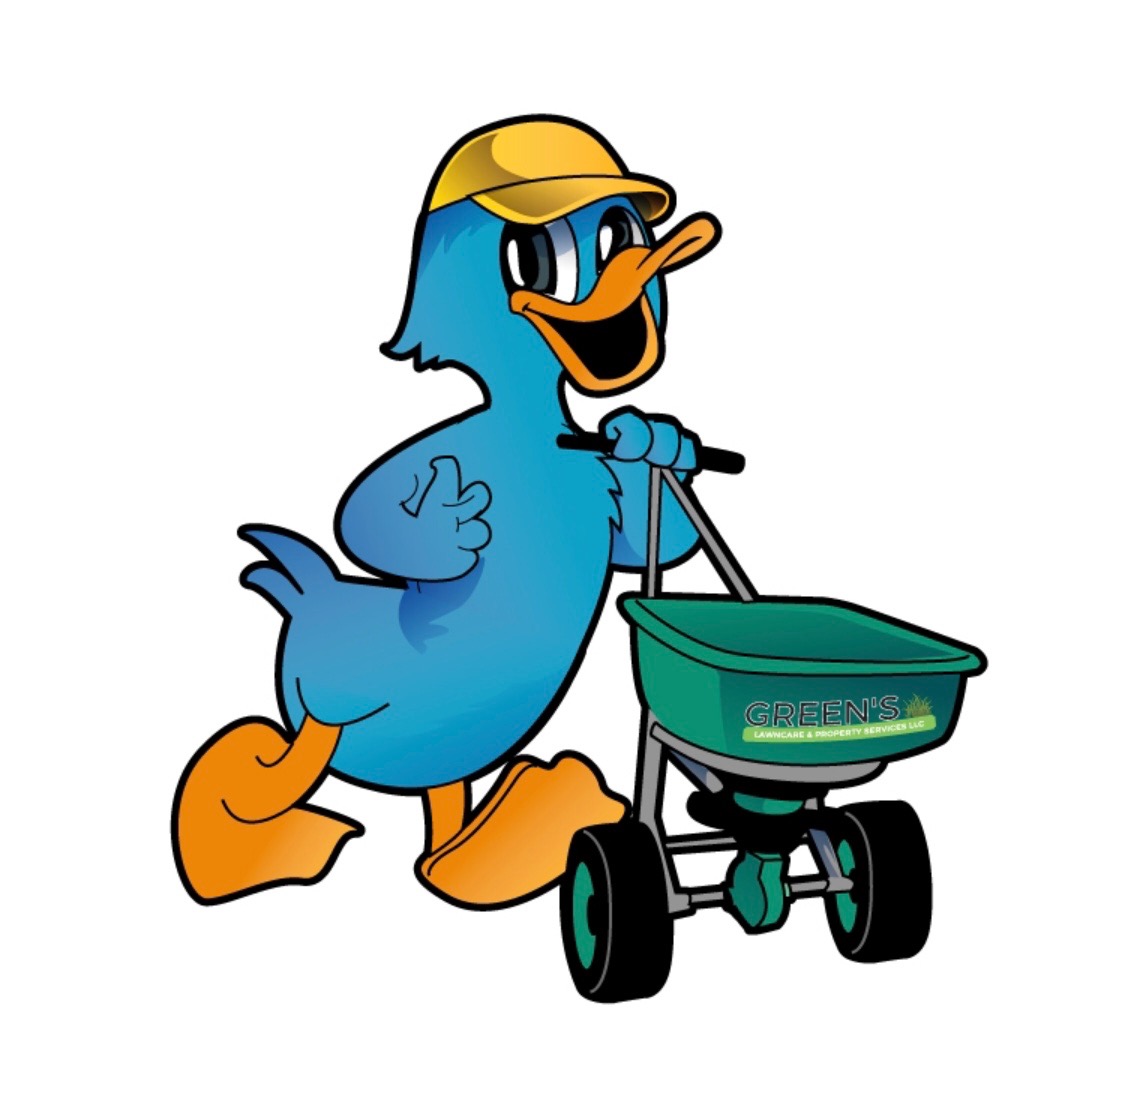 Mr. Quacker's is our mascot and does a fine job pushing a spreader!